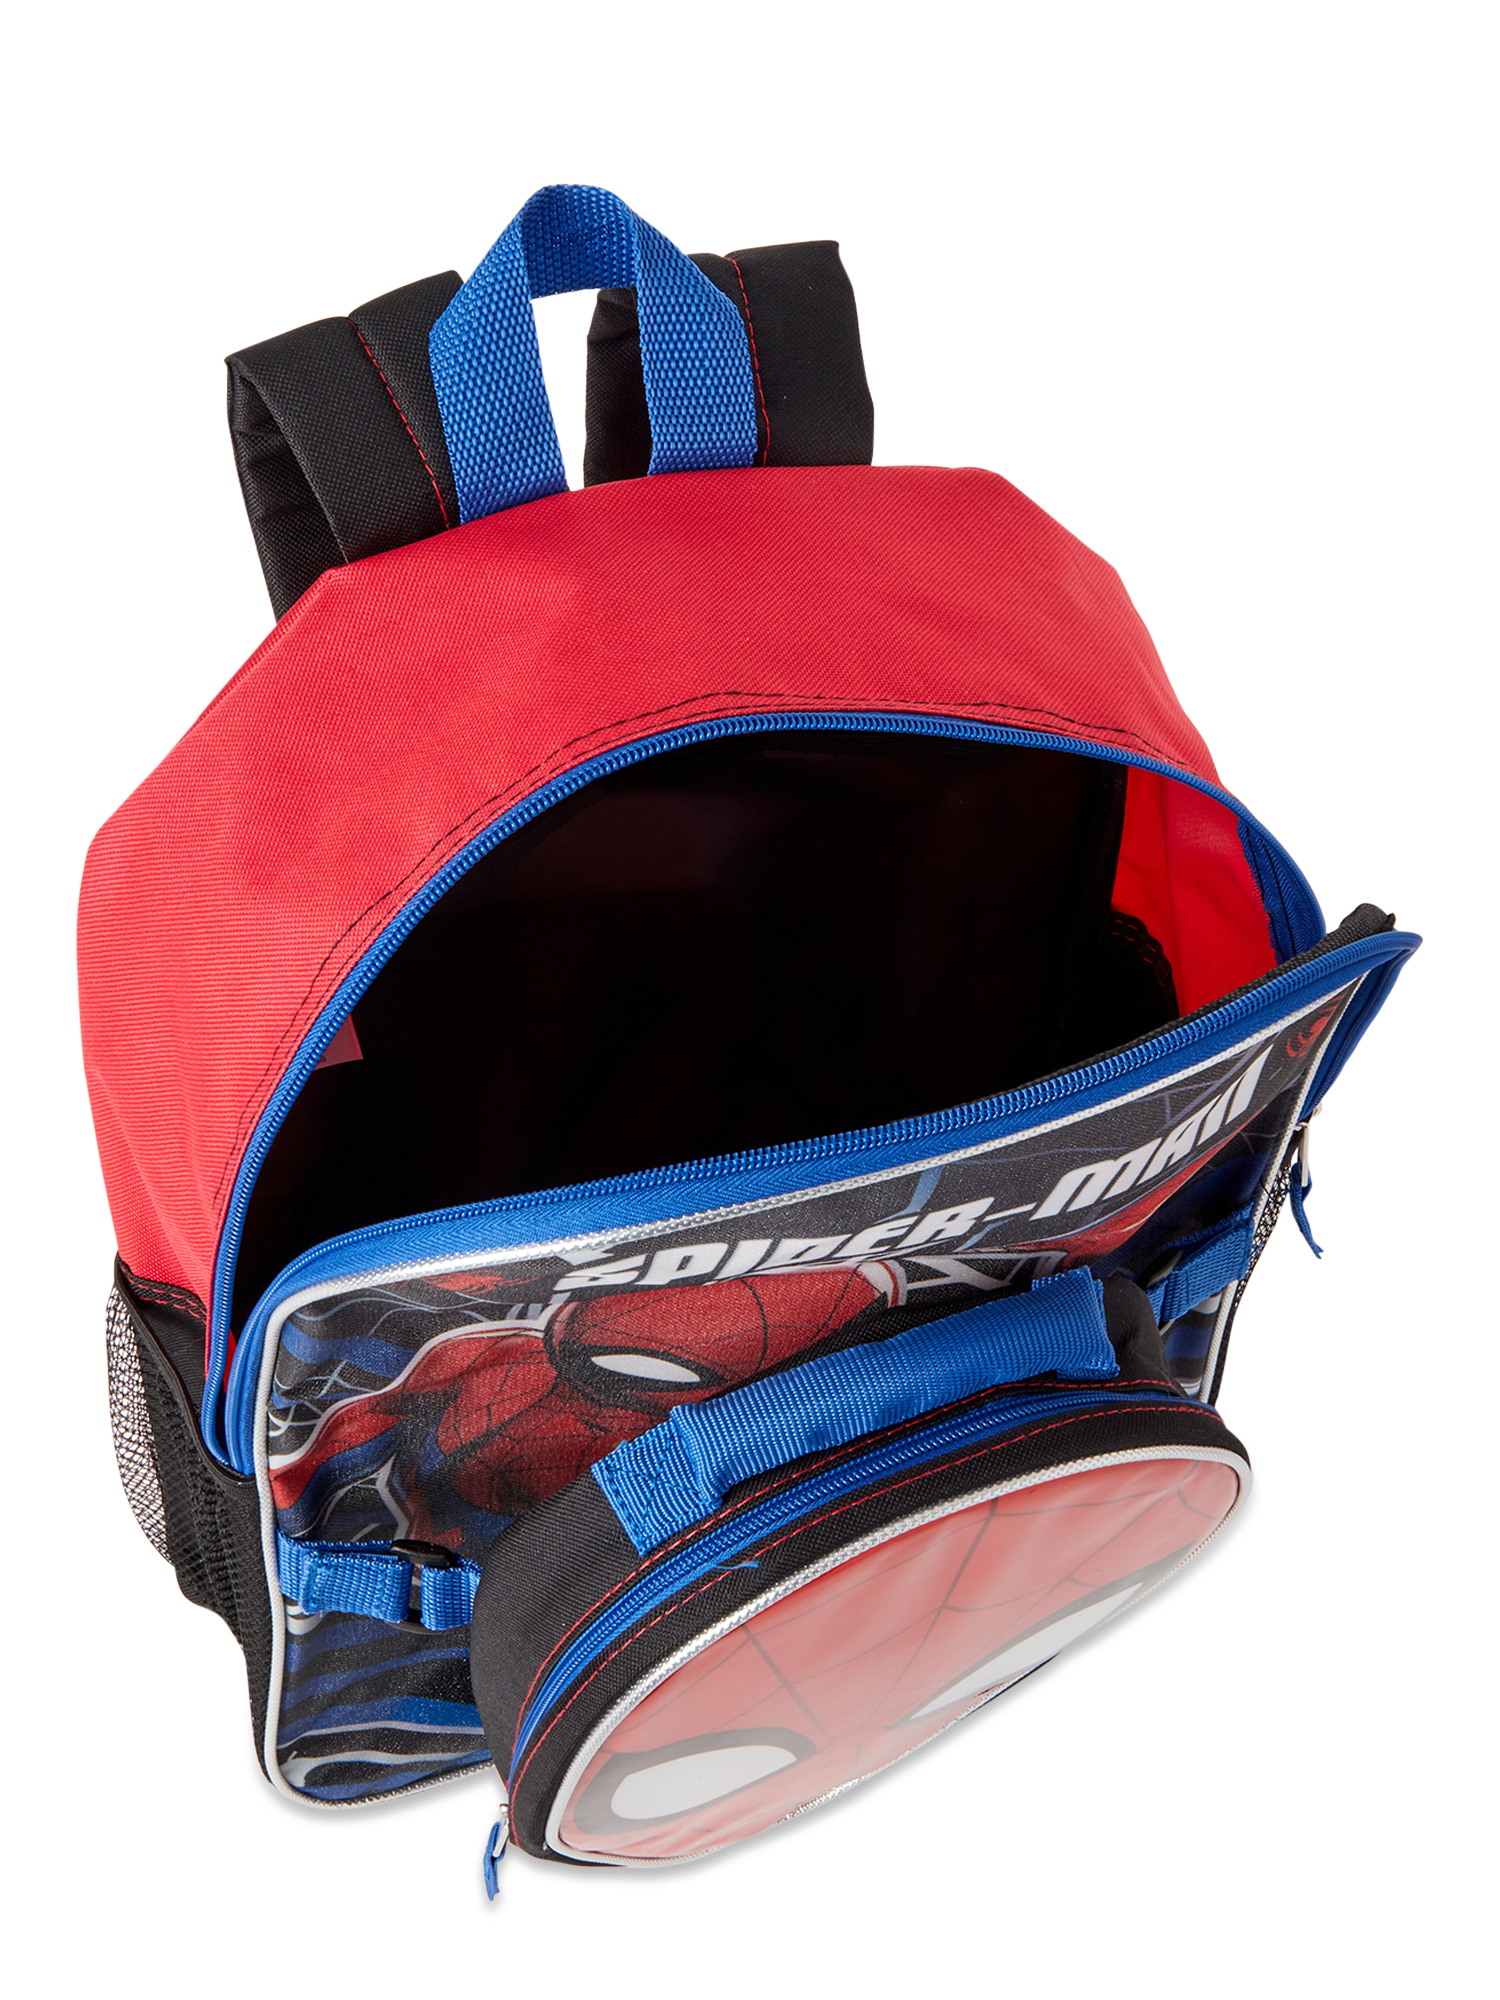 Spider-Man Backpack with Lunch Bag - image 4 of 4